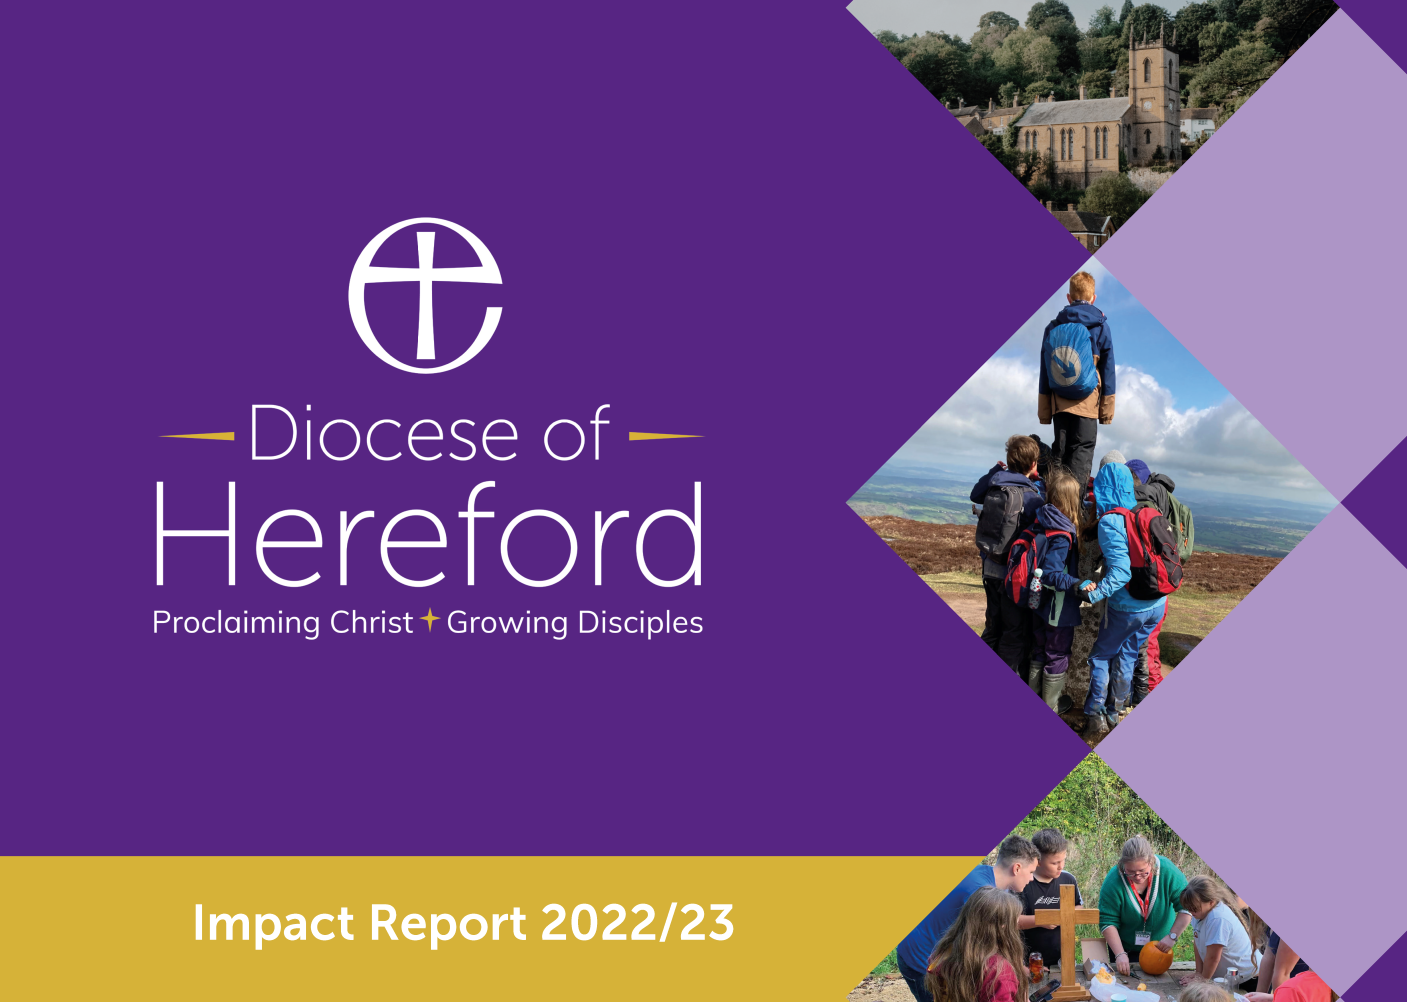 Online flip magazine of our 2022 Impact Report